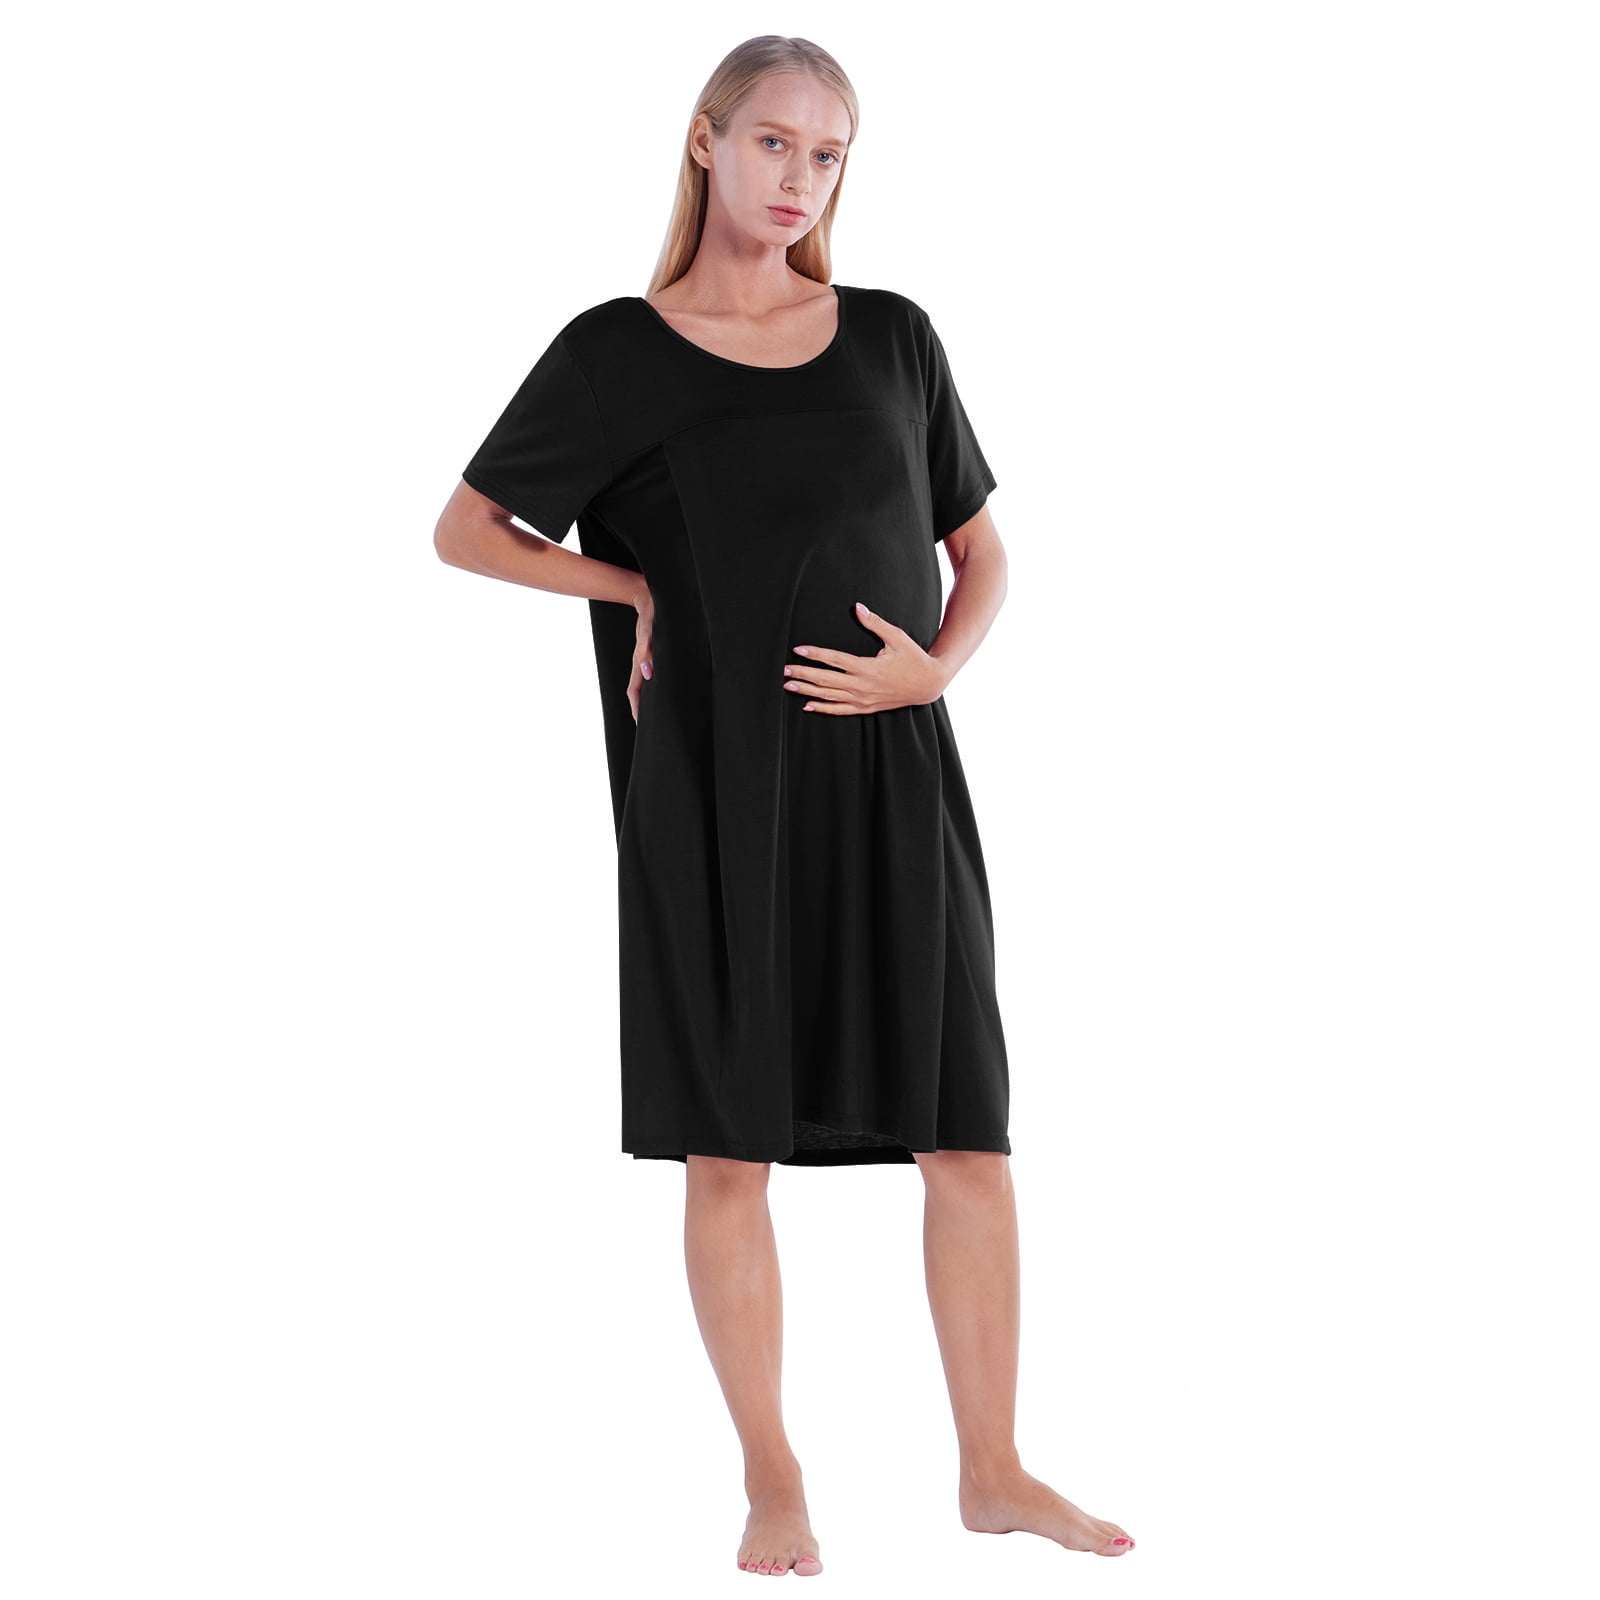 Amazon.com: Labor And Delivery Gown